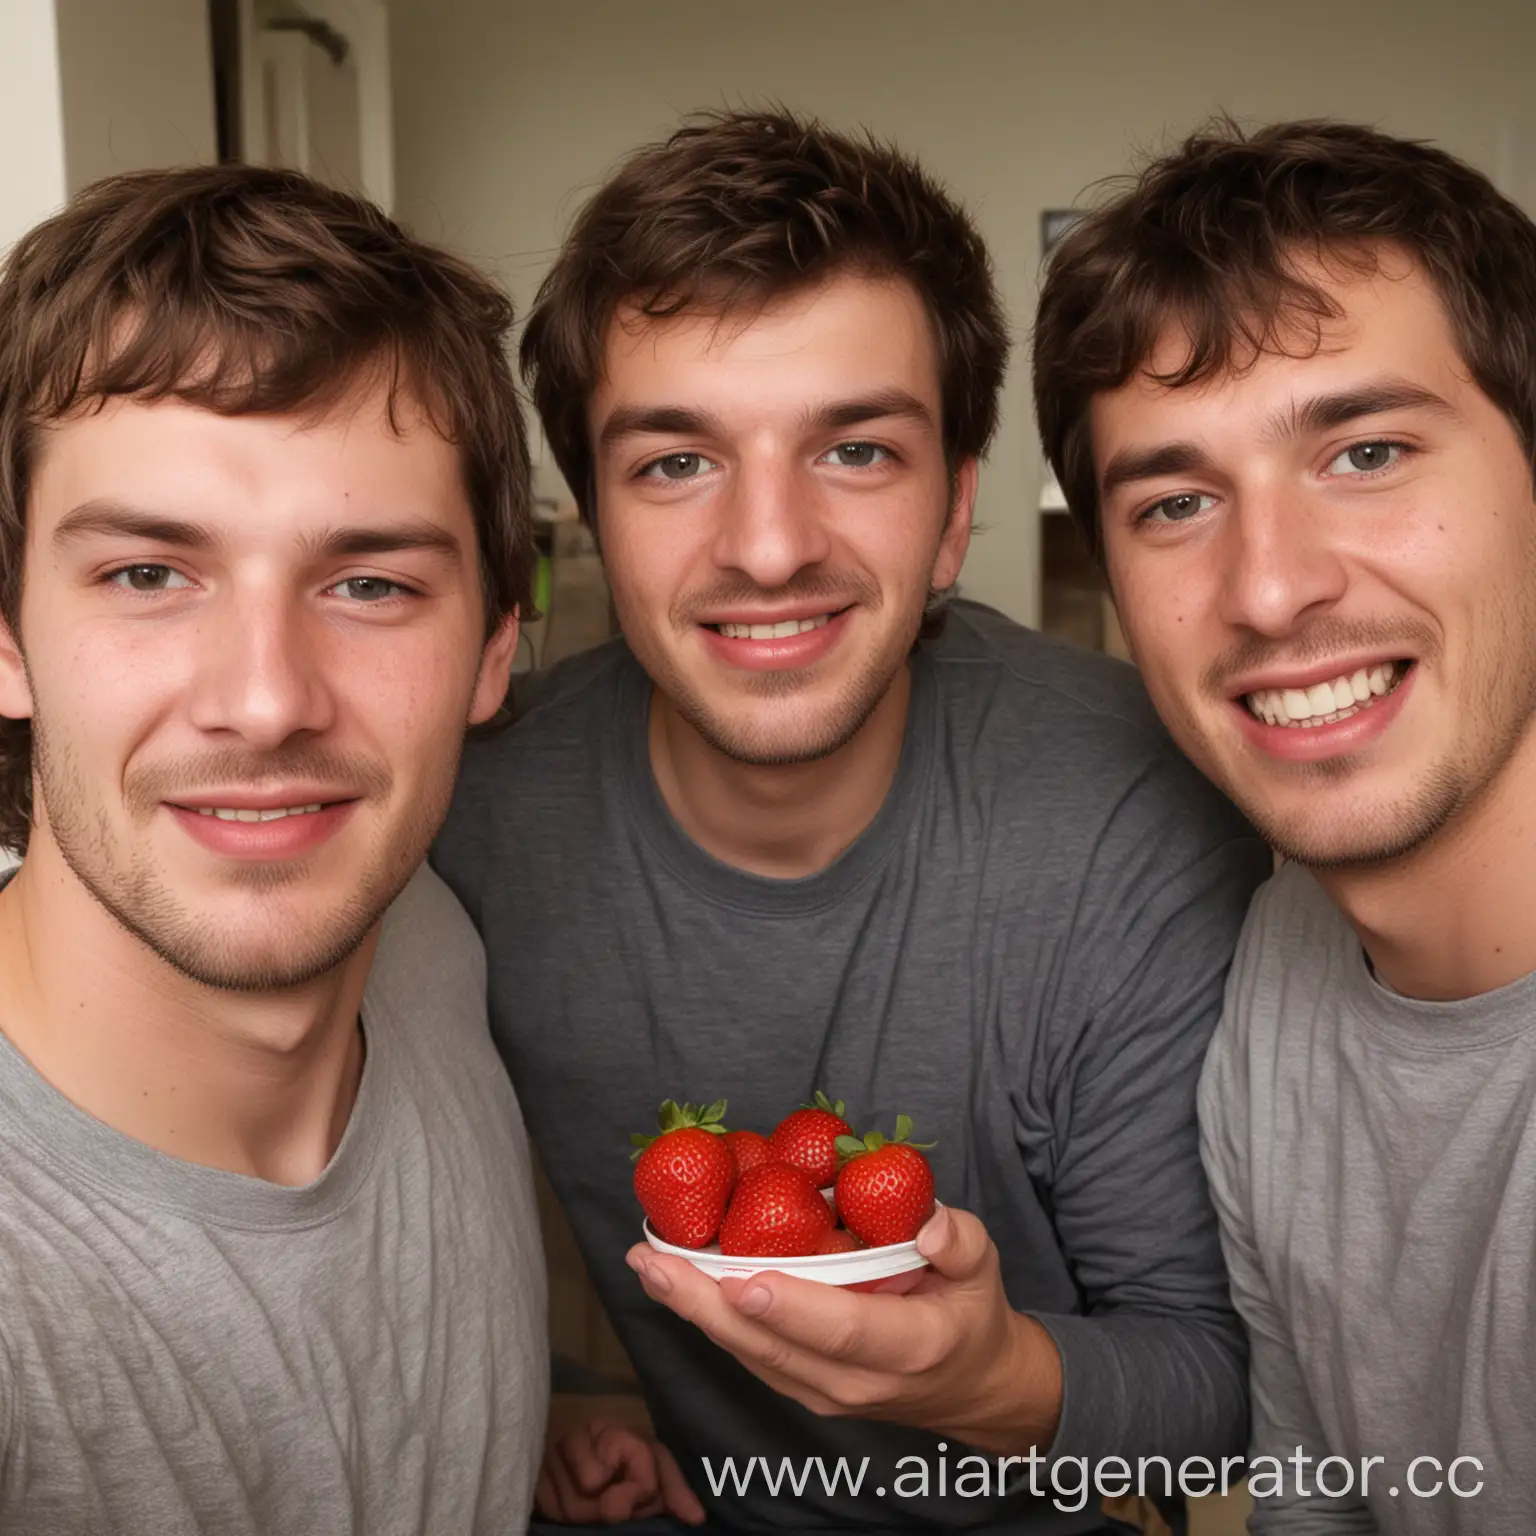 a man and his 2 strawberry-choked roommates